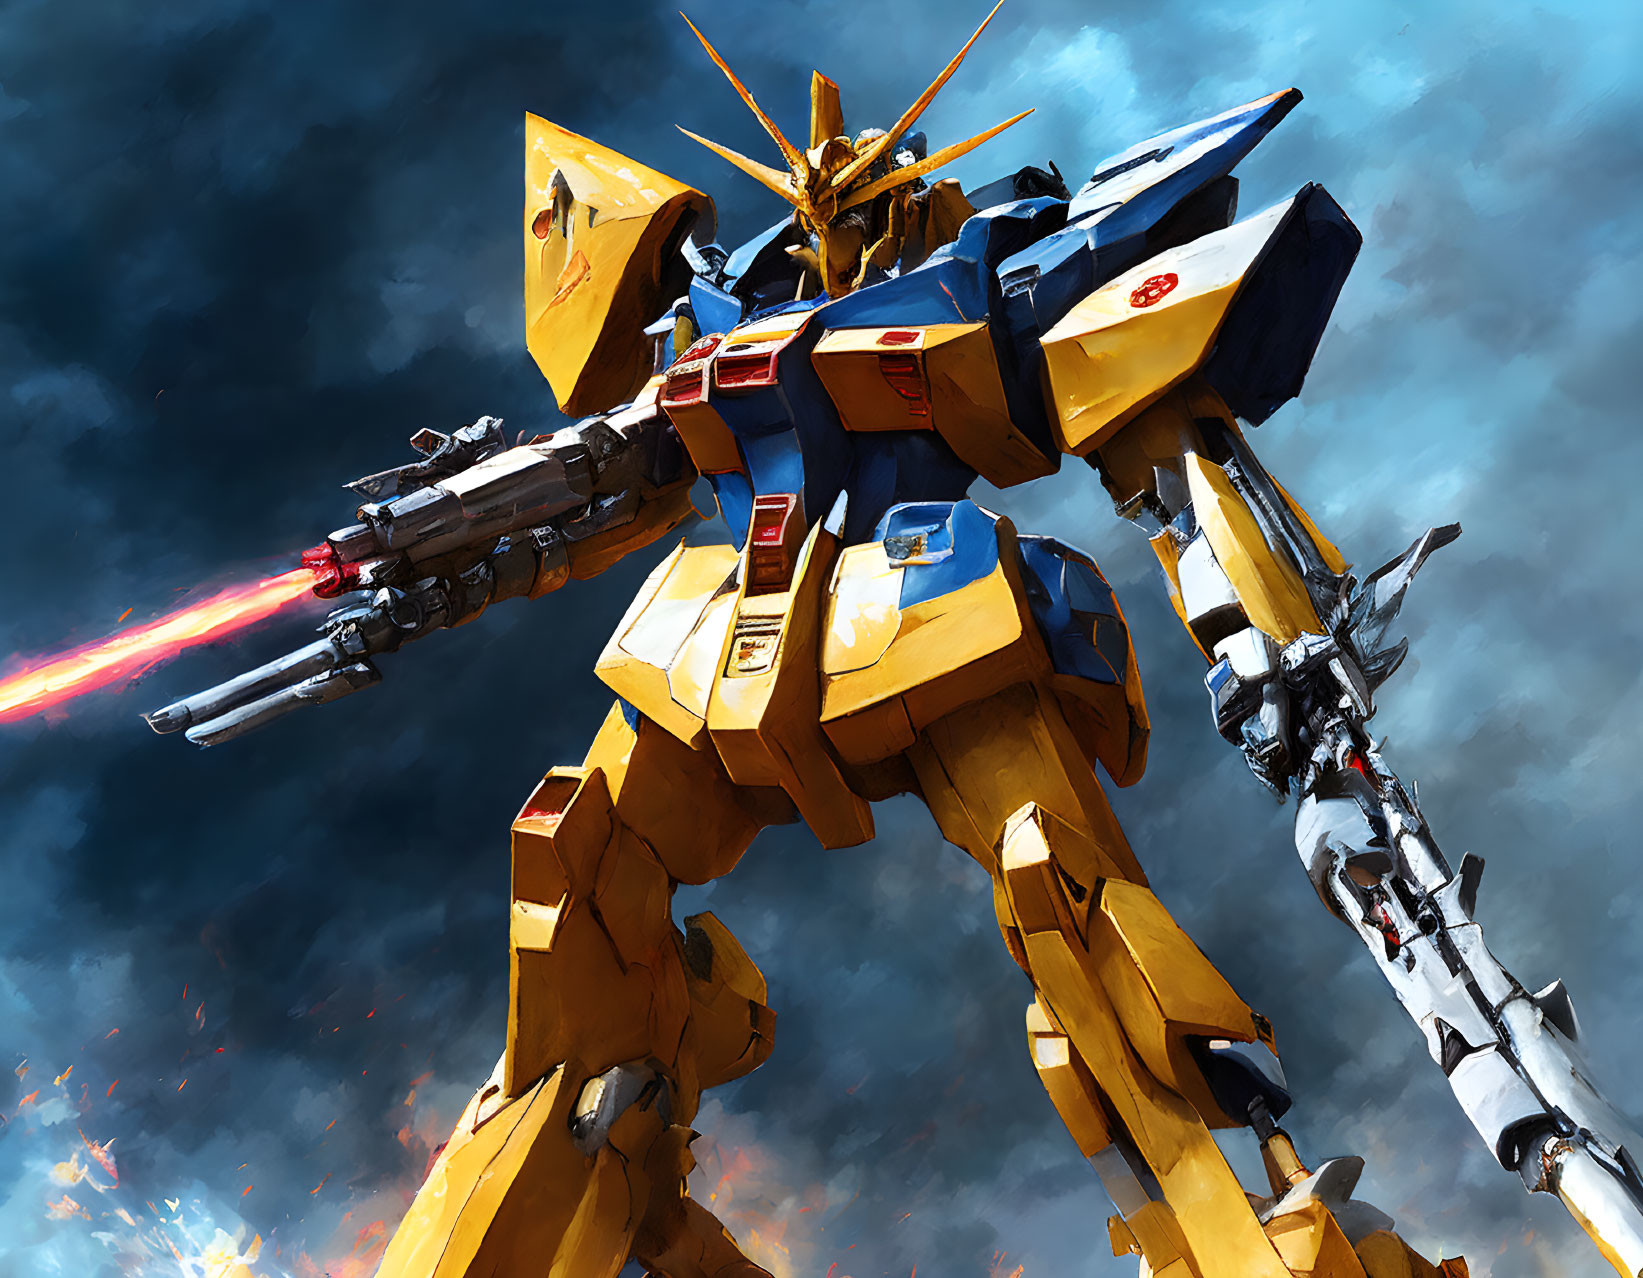 Giant yellow and blue robot shooting red beam under cloudy sky